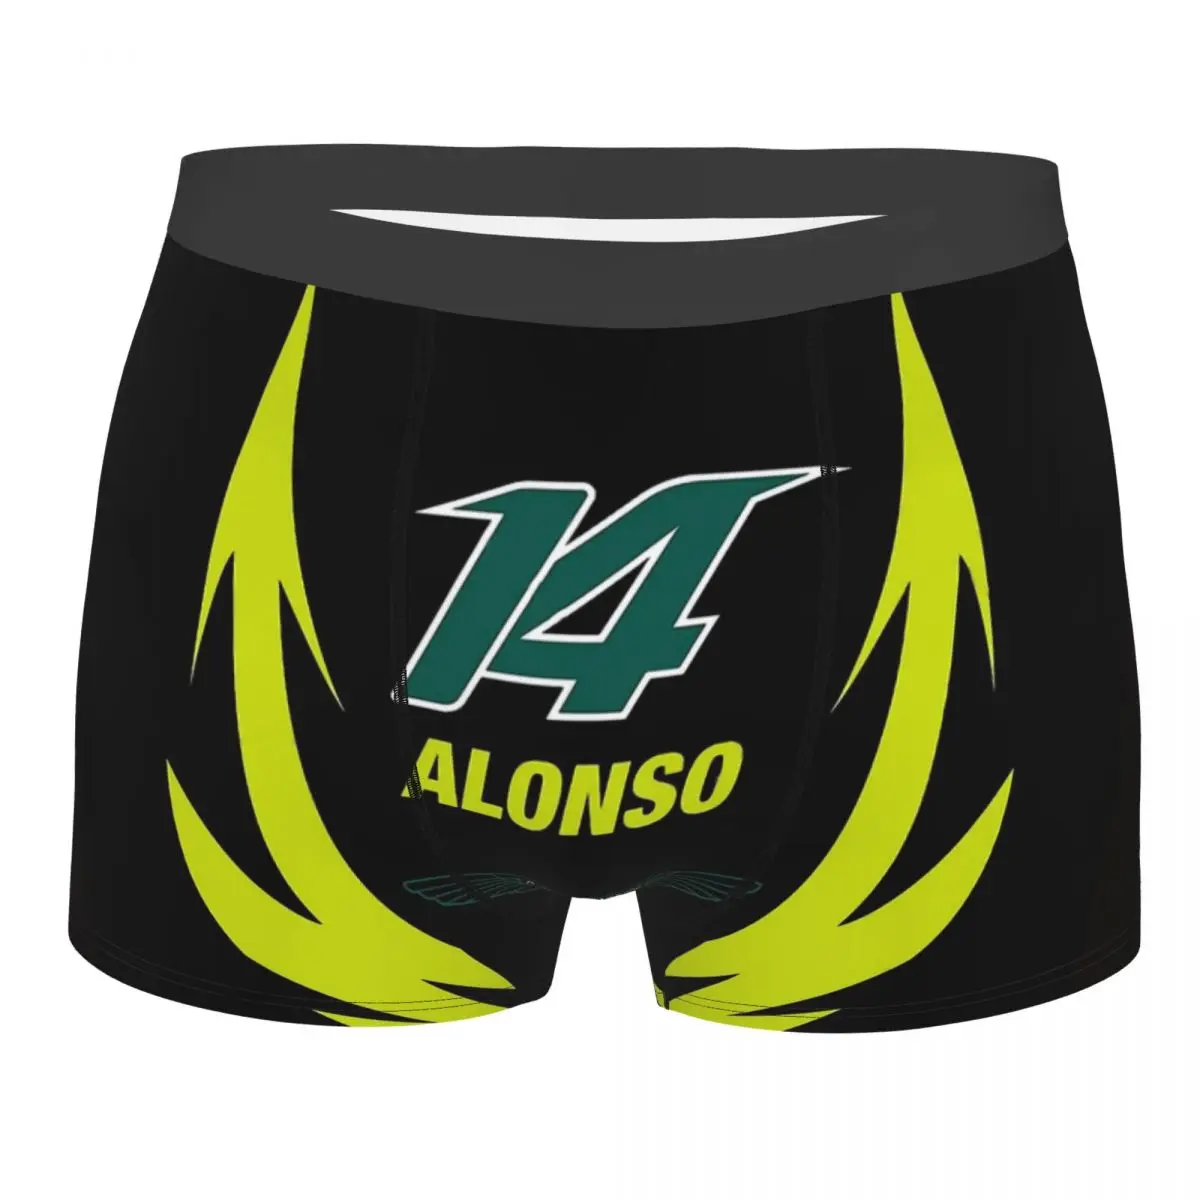 

Fernando Alonso 14 2023 Men Printed Boxer Briefs Underpants Accessories Outfits Highly Breathable High Quality Birthday Gifts